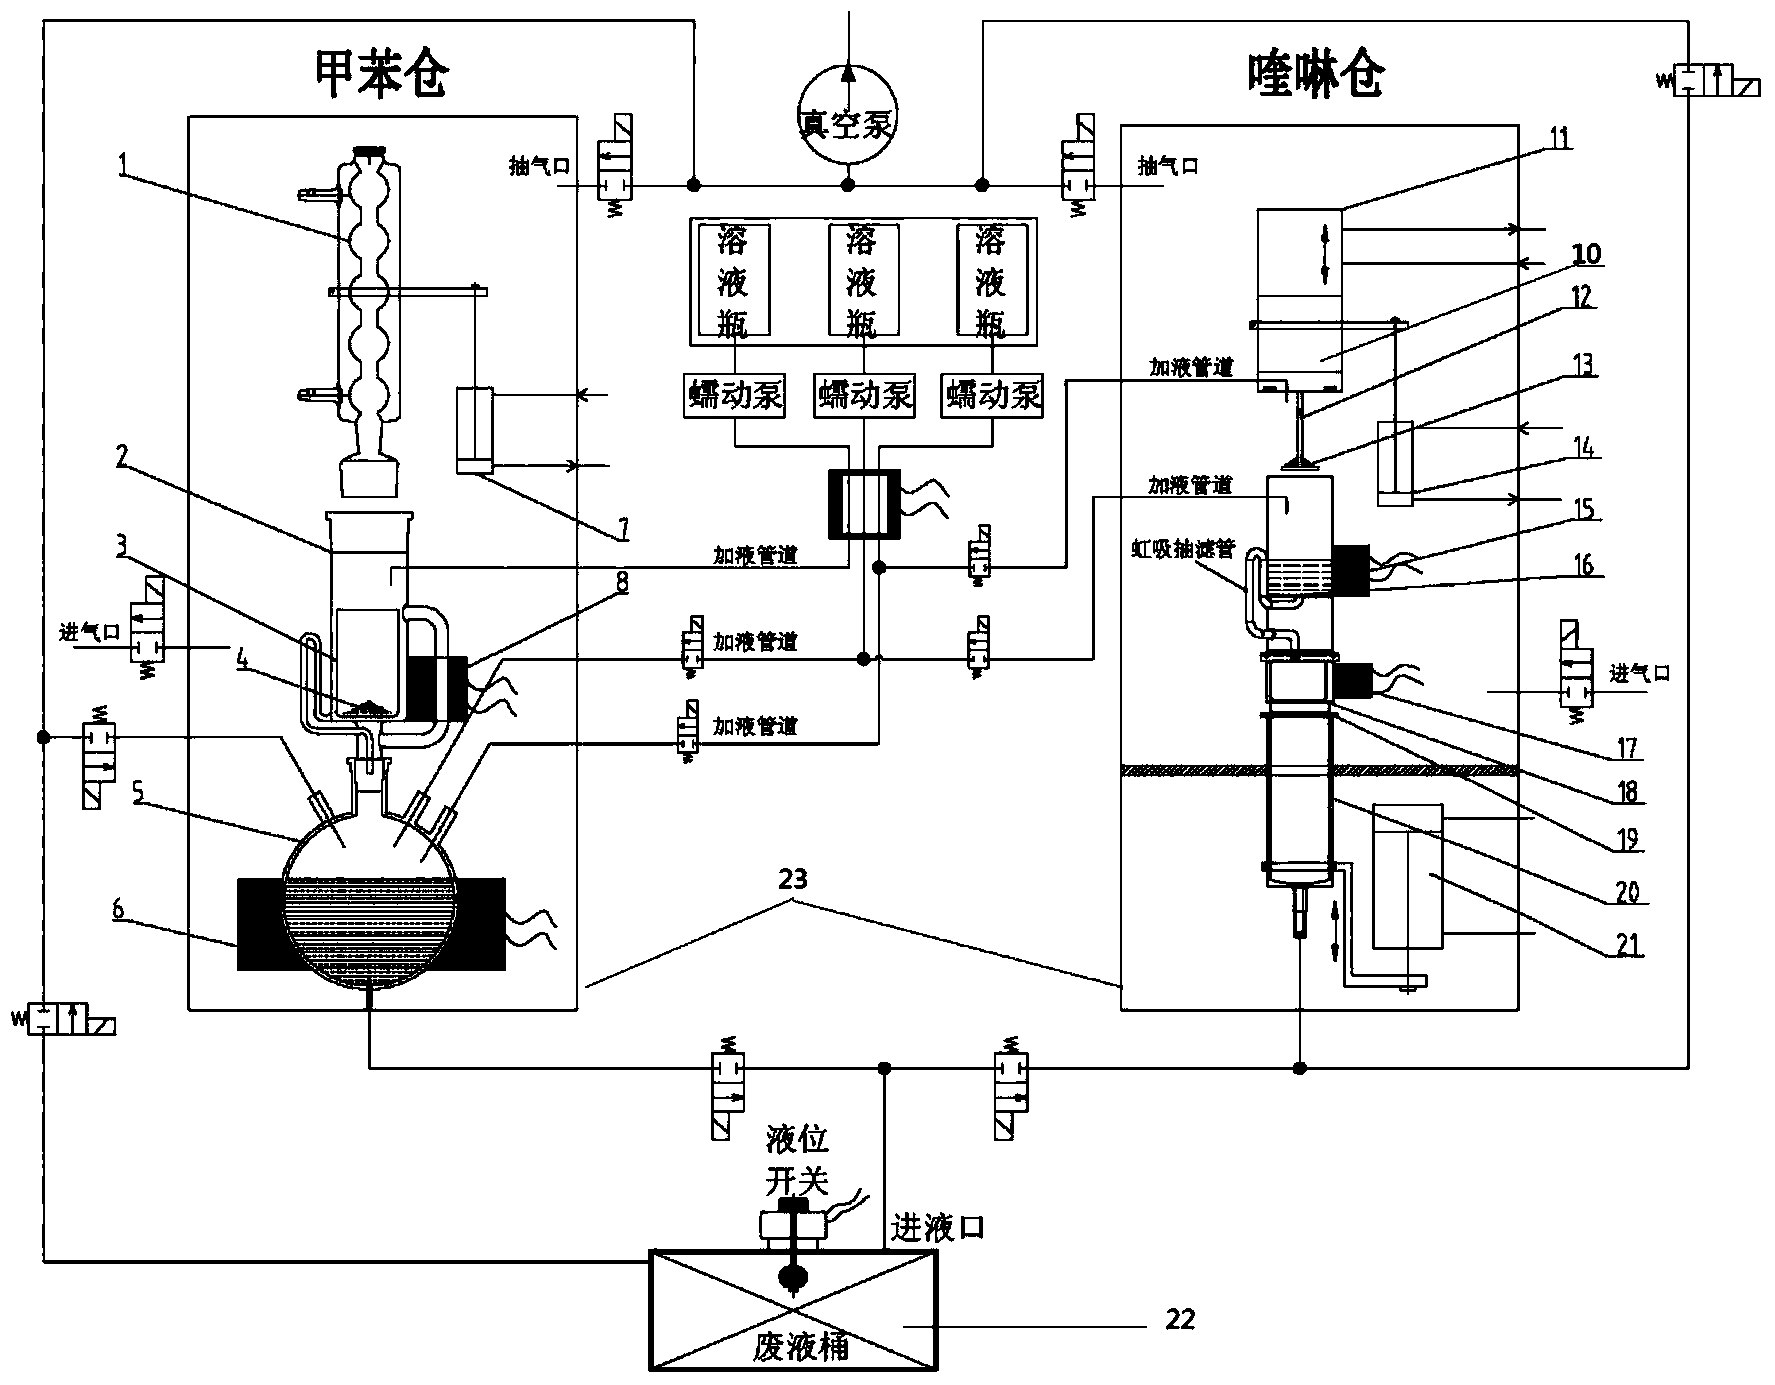 Device for simultaneously measuring plurality of types of insoluble substances